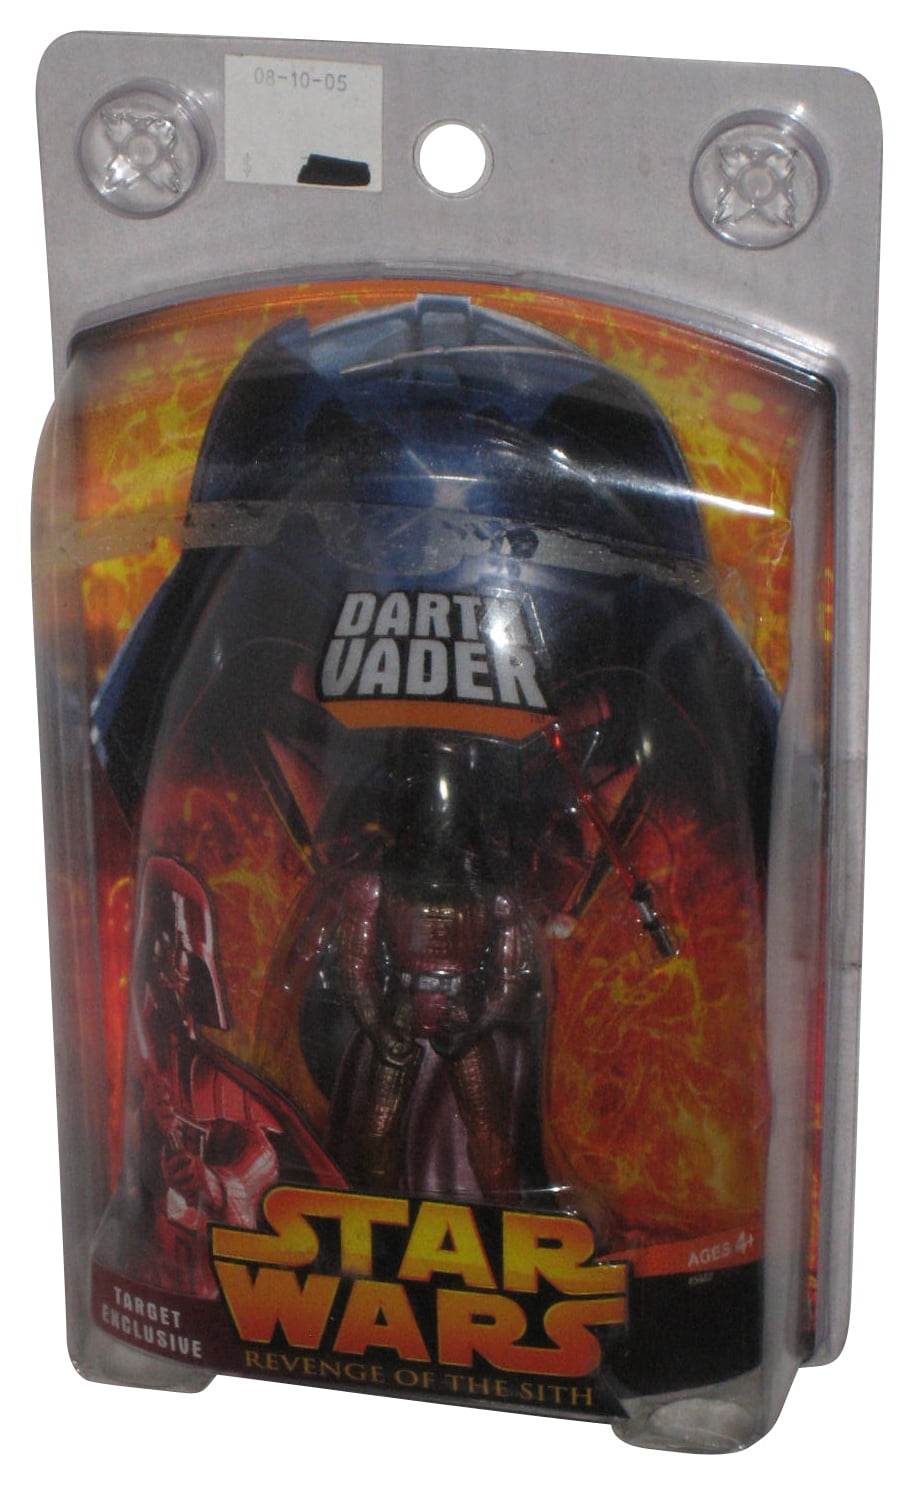 Hasbro Star Wars Revenge of the Sith Target Exclusive Lava Darth Vader 1 0f 50000 Action Figure for sale online 